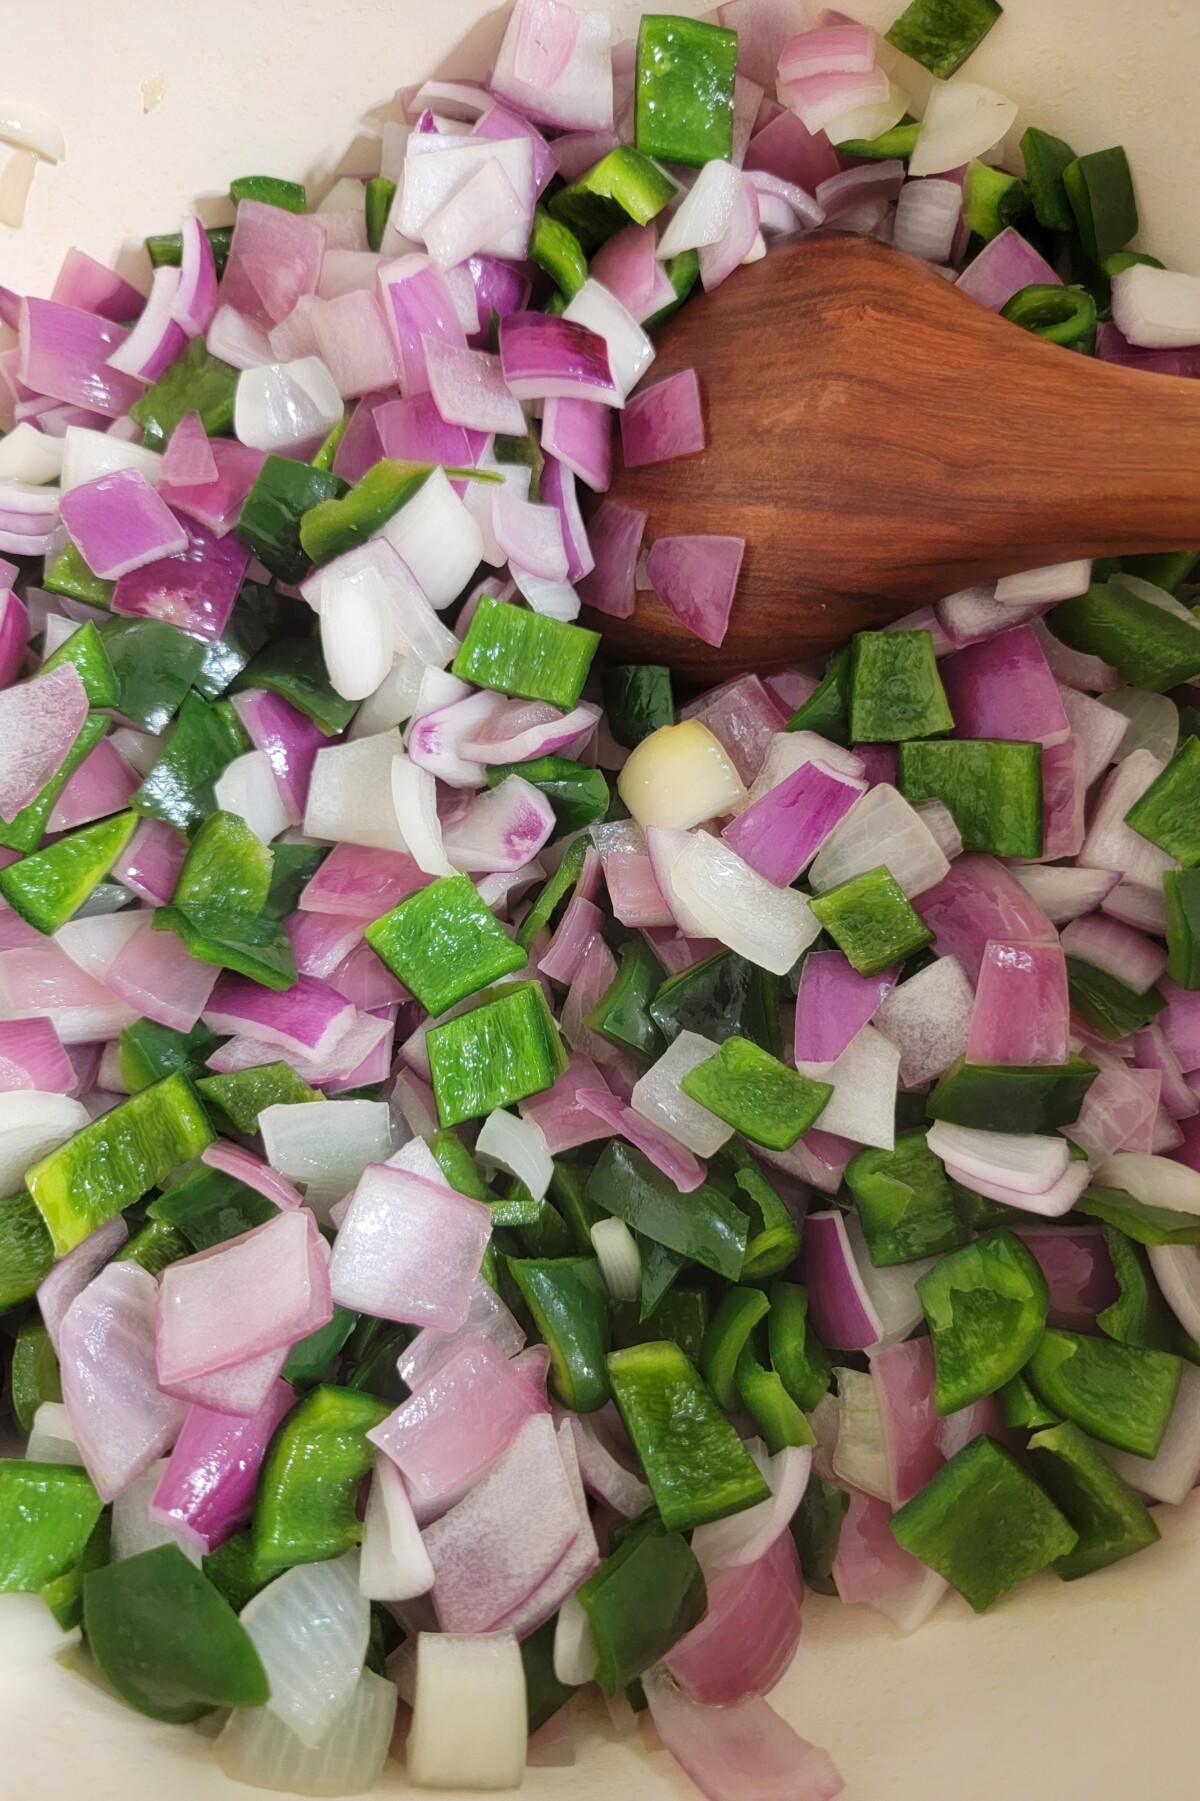 Onions and peppers